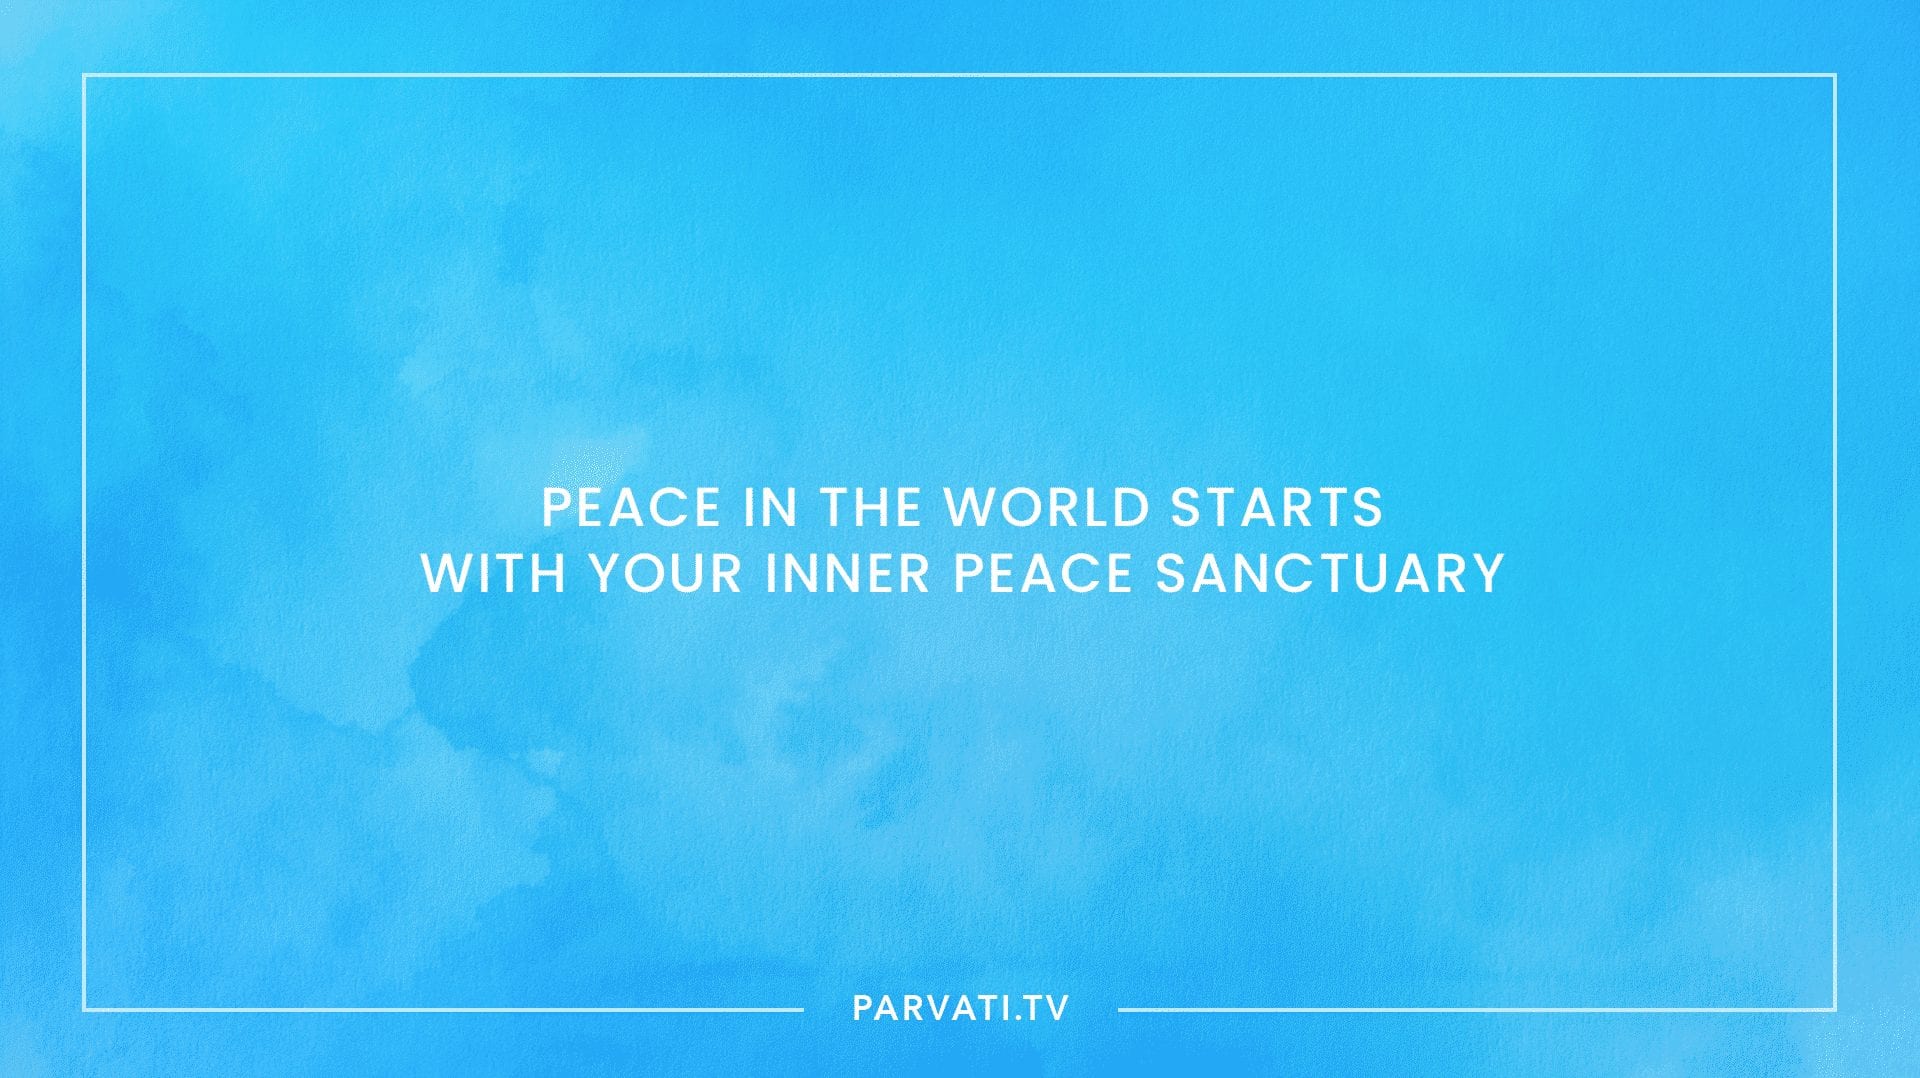 Parvati: Peace in the world starts with your inner peace sanctuary